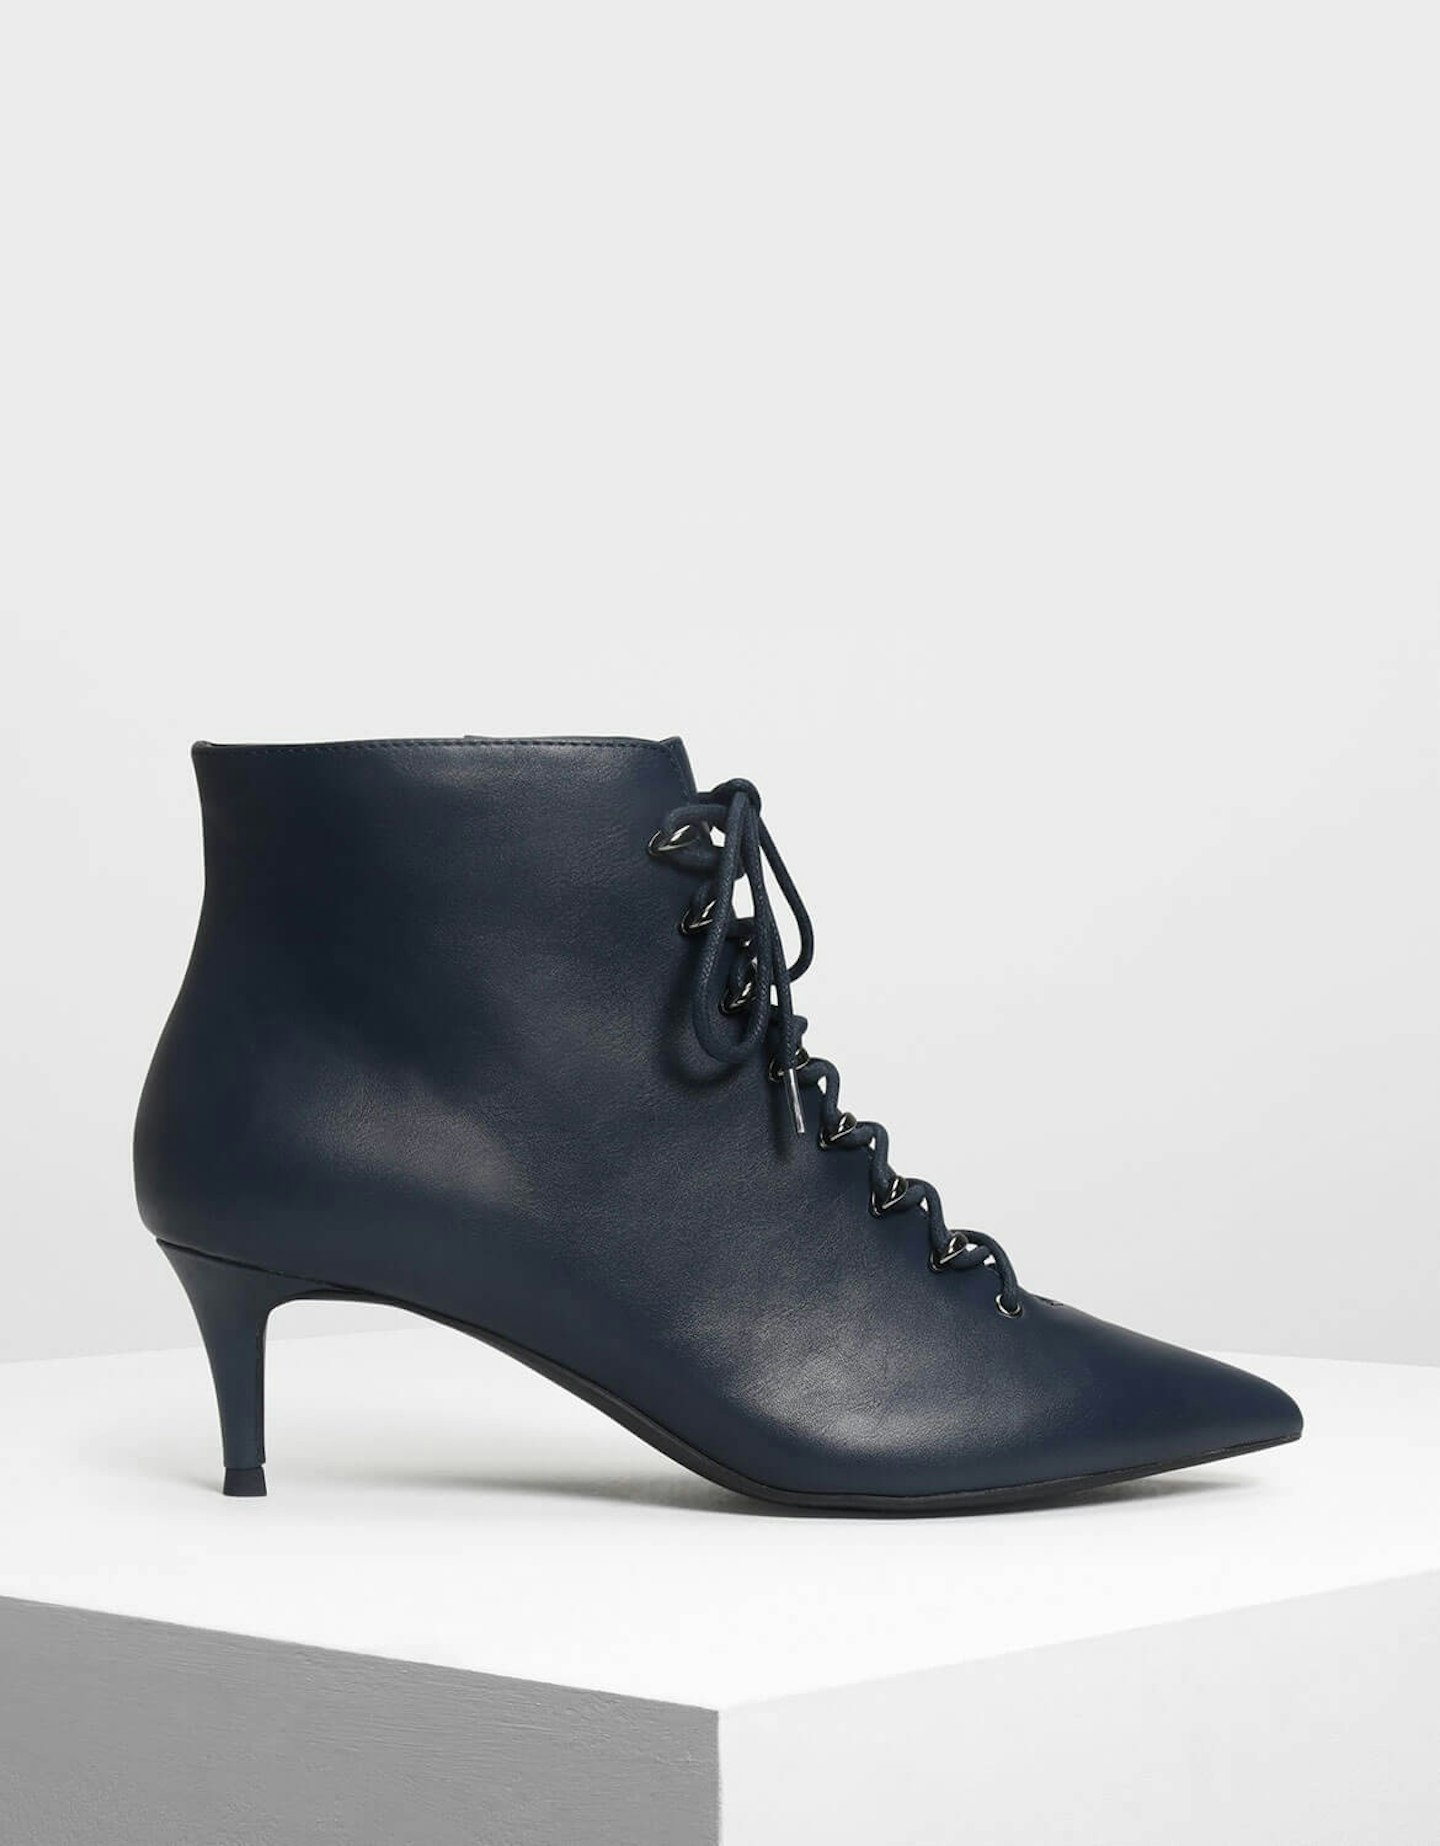 Charles & Keith, Speed Lacing Detail Pointed Boots, £69